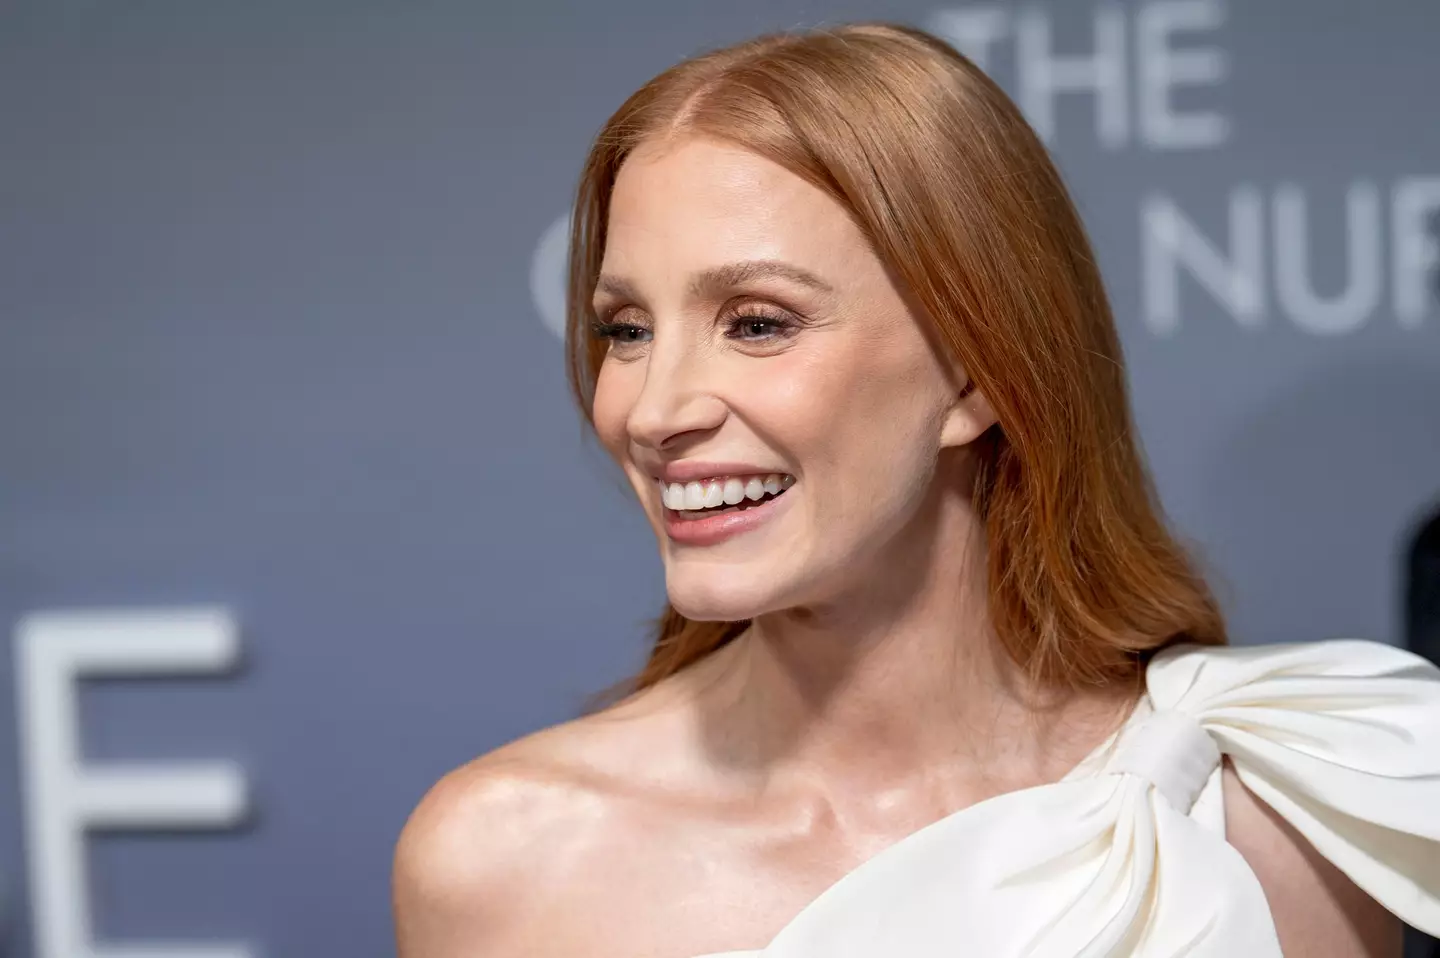 Jessica Chastain was given as an example by one Twitter user how 45-year-olds in films now are different to the 1990s.